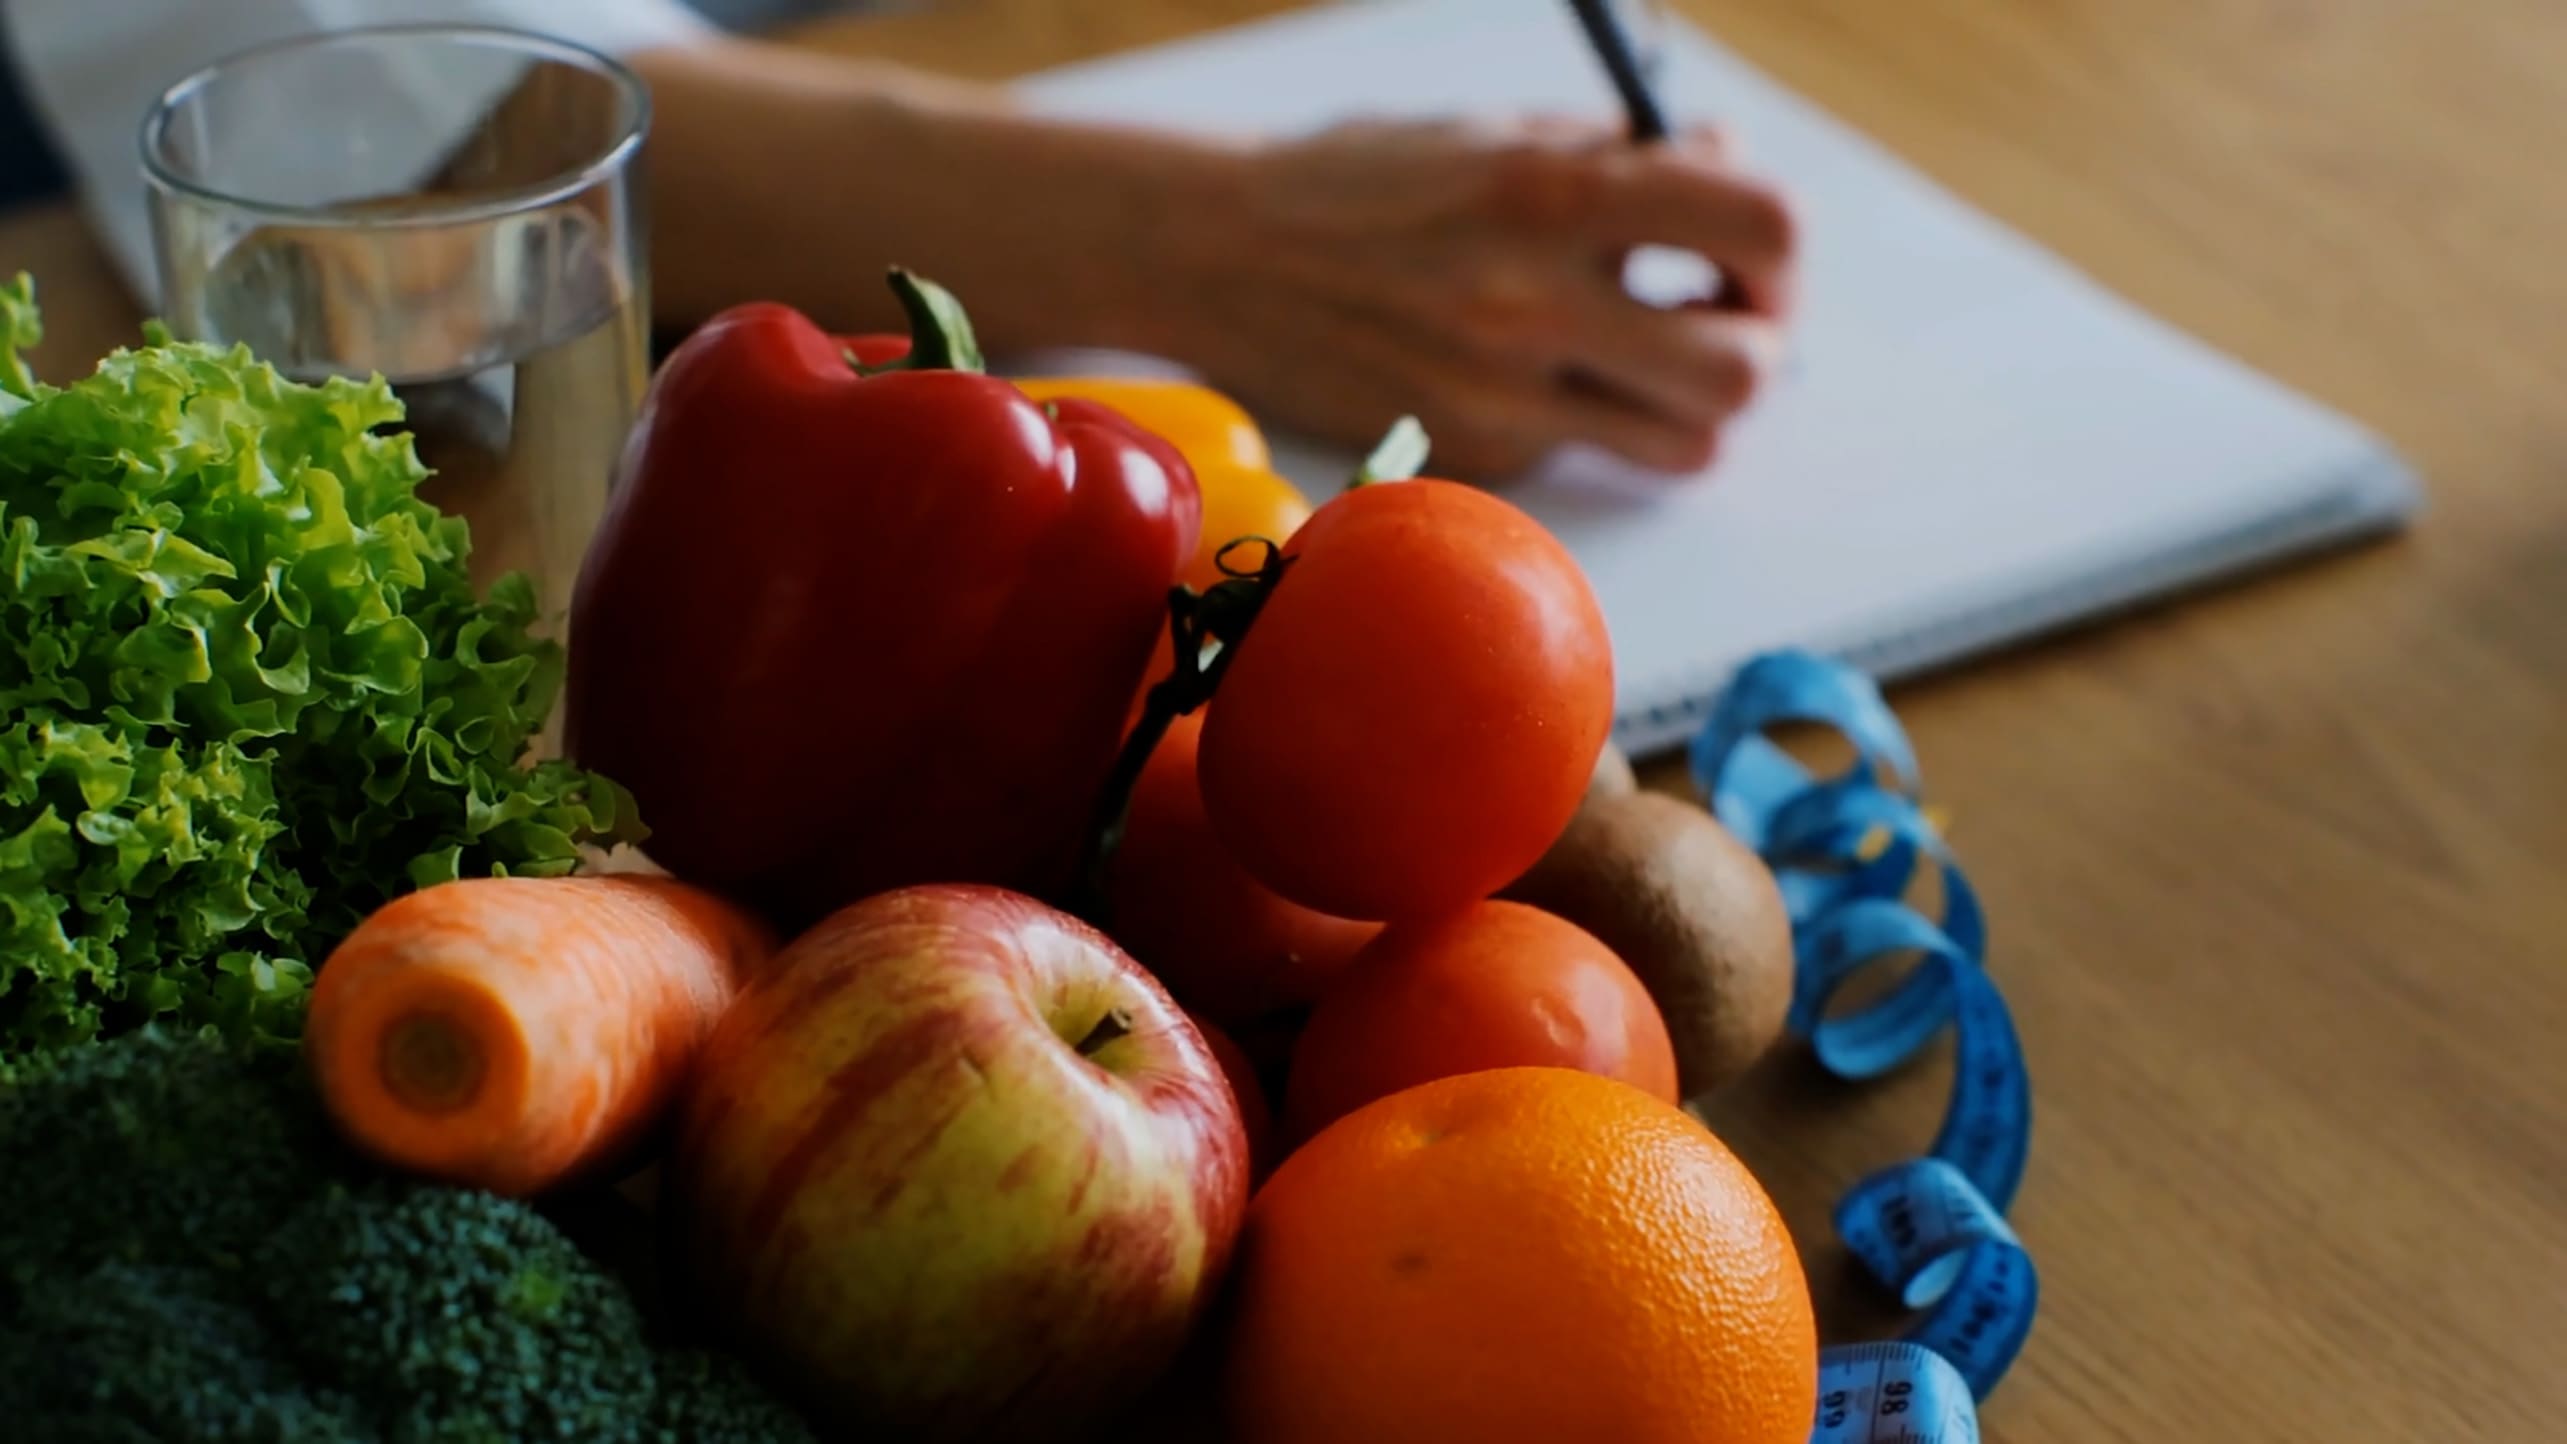 A small pile of fresh fruits and vegetables in the foreground with a hand holding a pen and writing in a notebook in the background